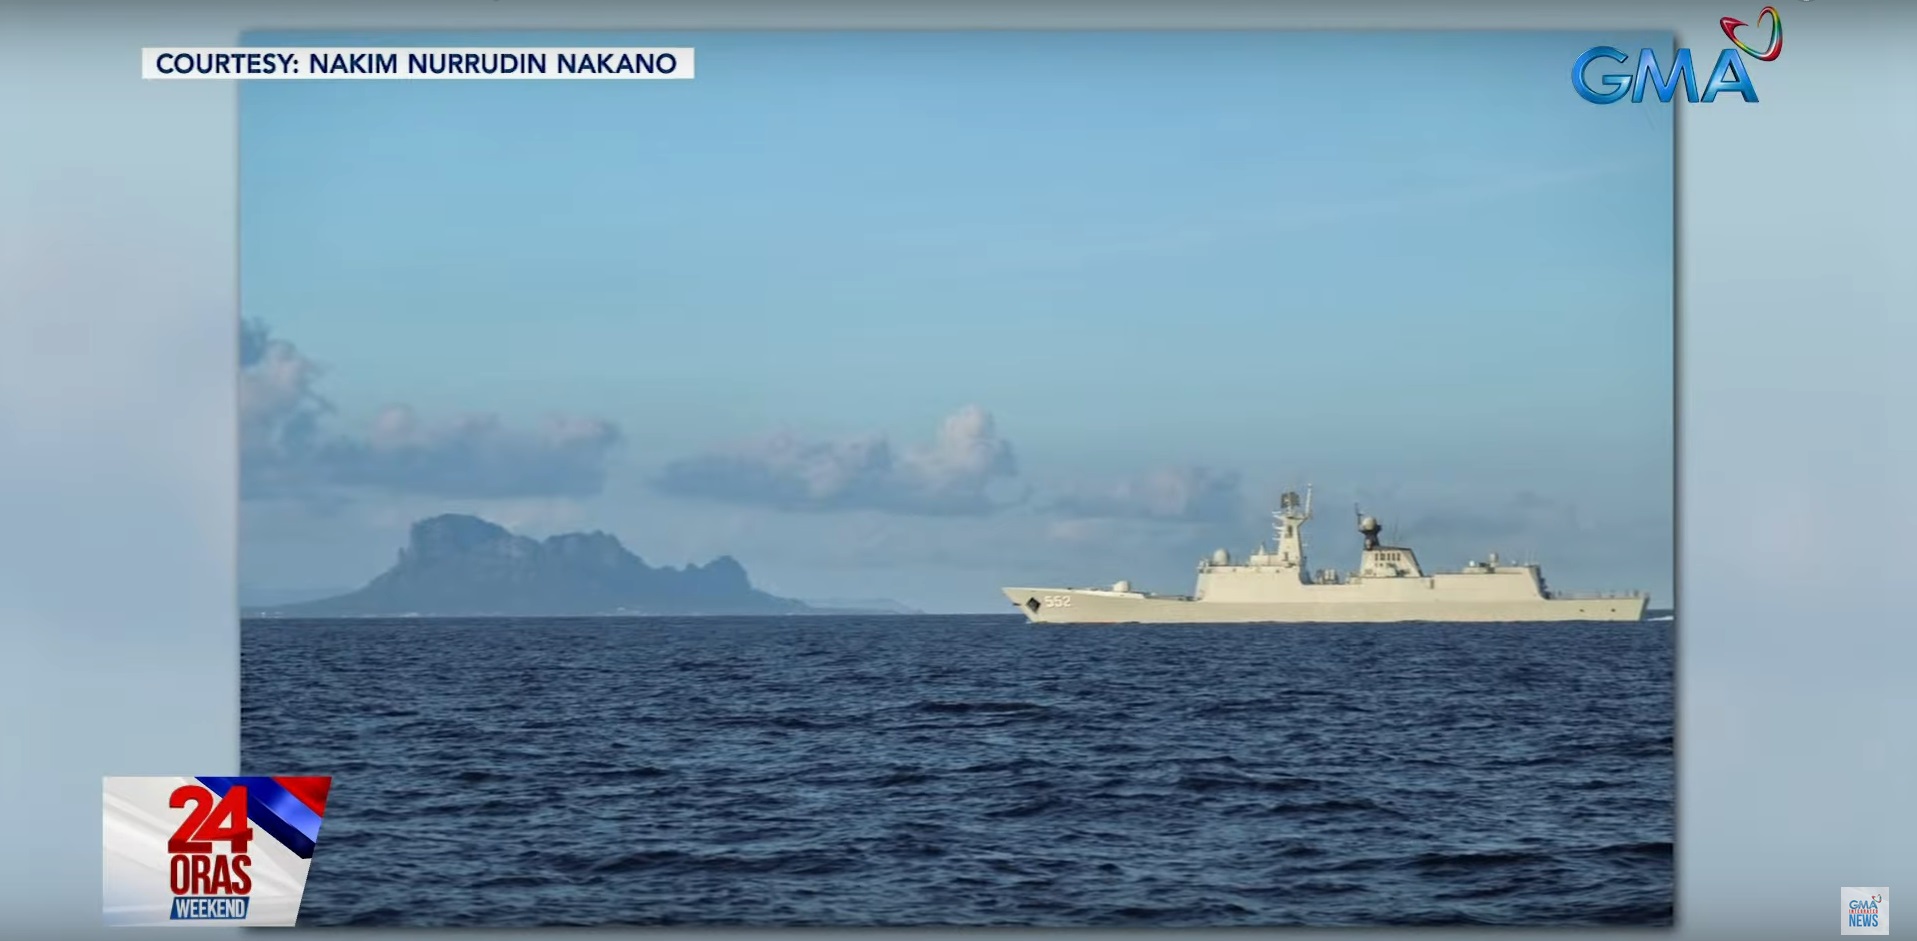 afp confirms 'innocent passage' of 4 china navy ships off tawi-tawi